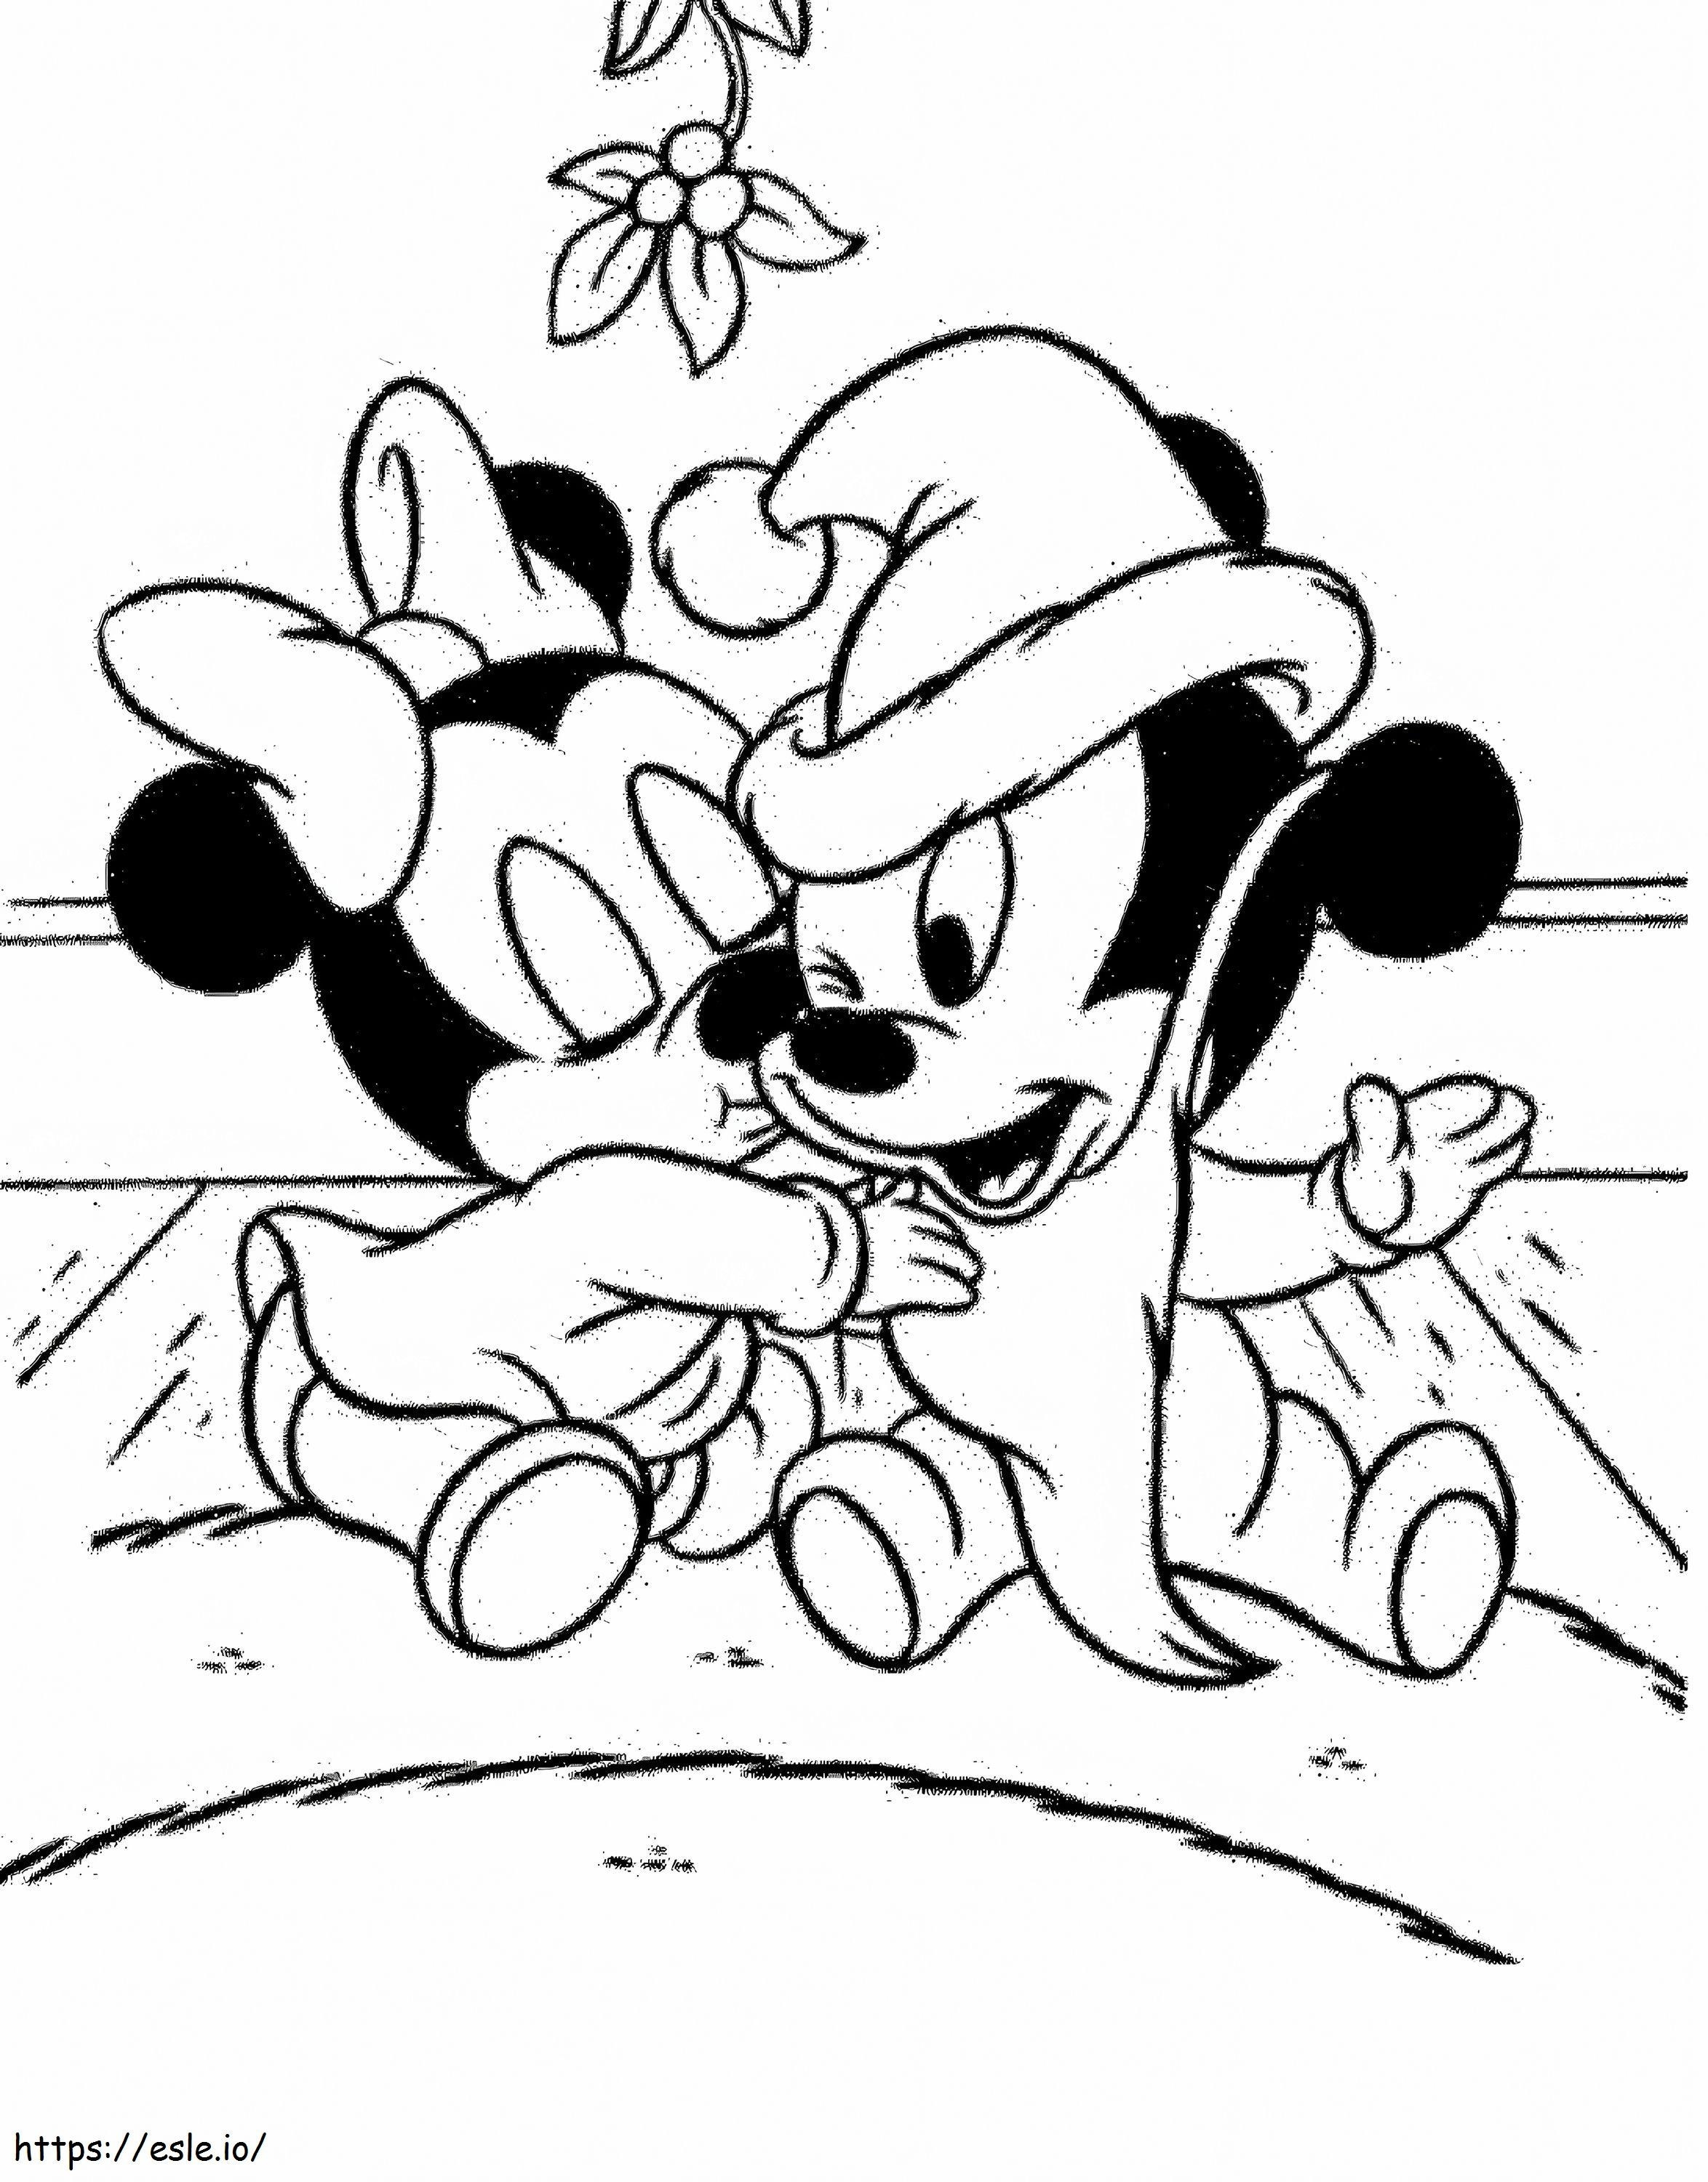 Baby Minnie Kissing Mickey Mouse coloring page